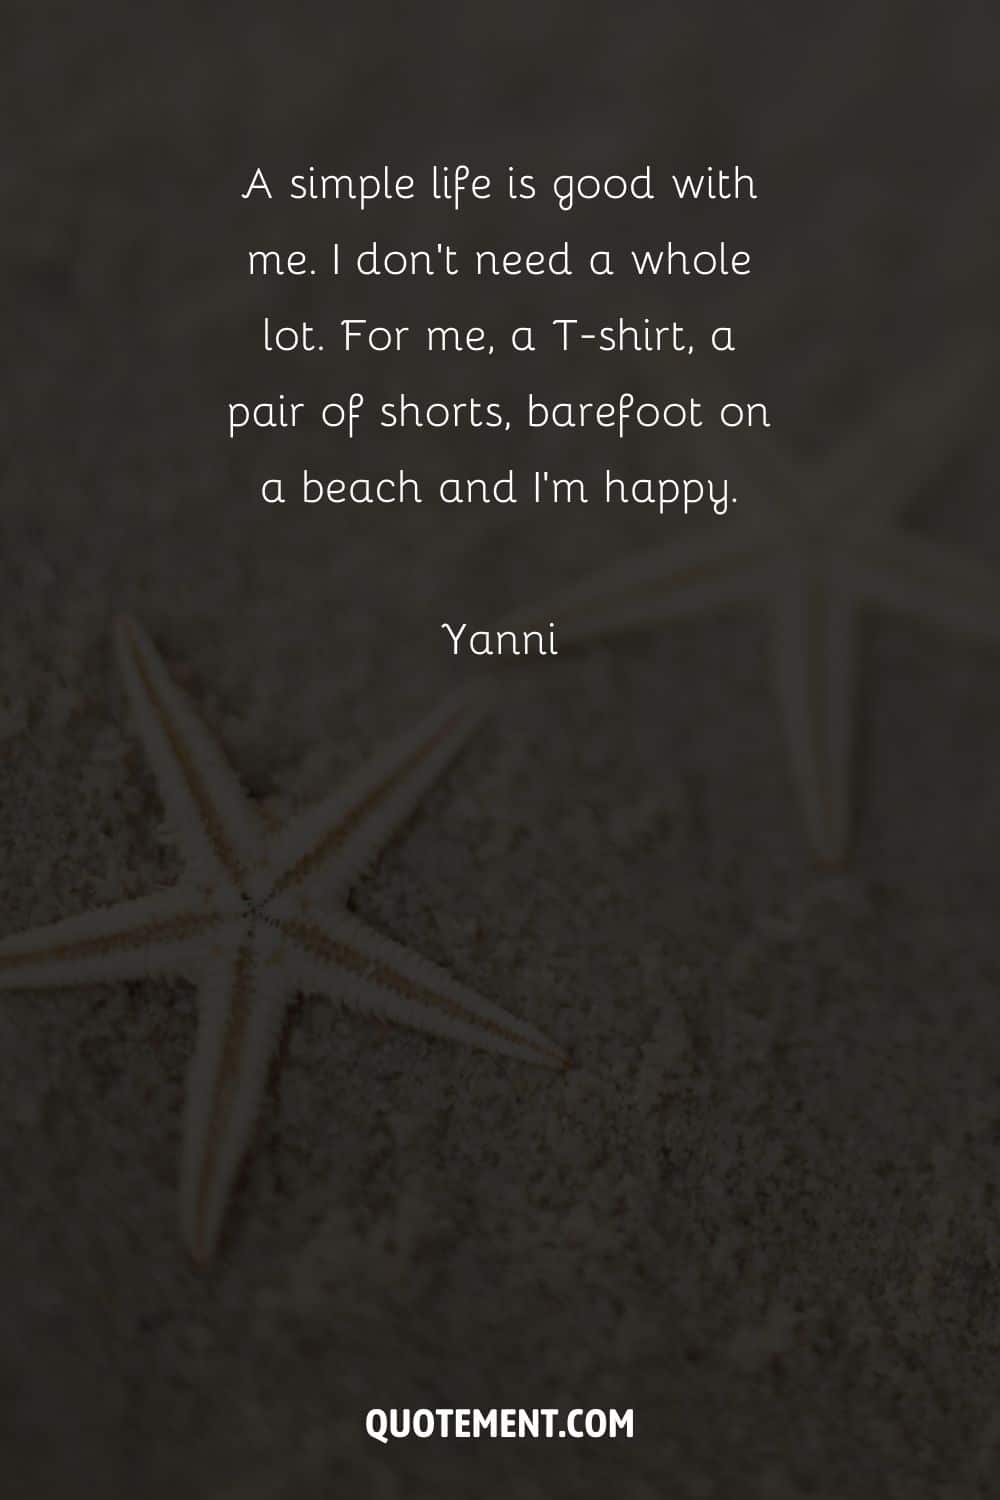 A simple life is good with me. I don't need a whole lot. For me, a T-shirt, a pair of shorts, barefoot on a beach and I'm happy. – Yanni